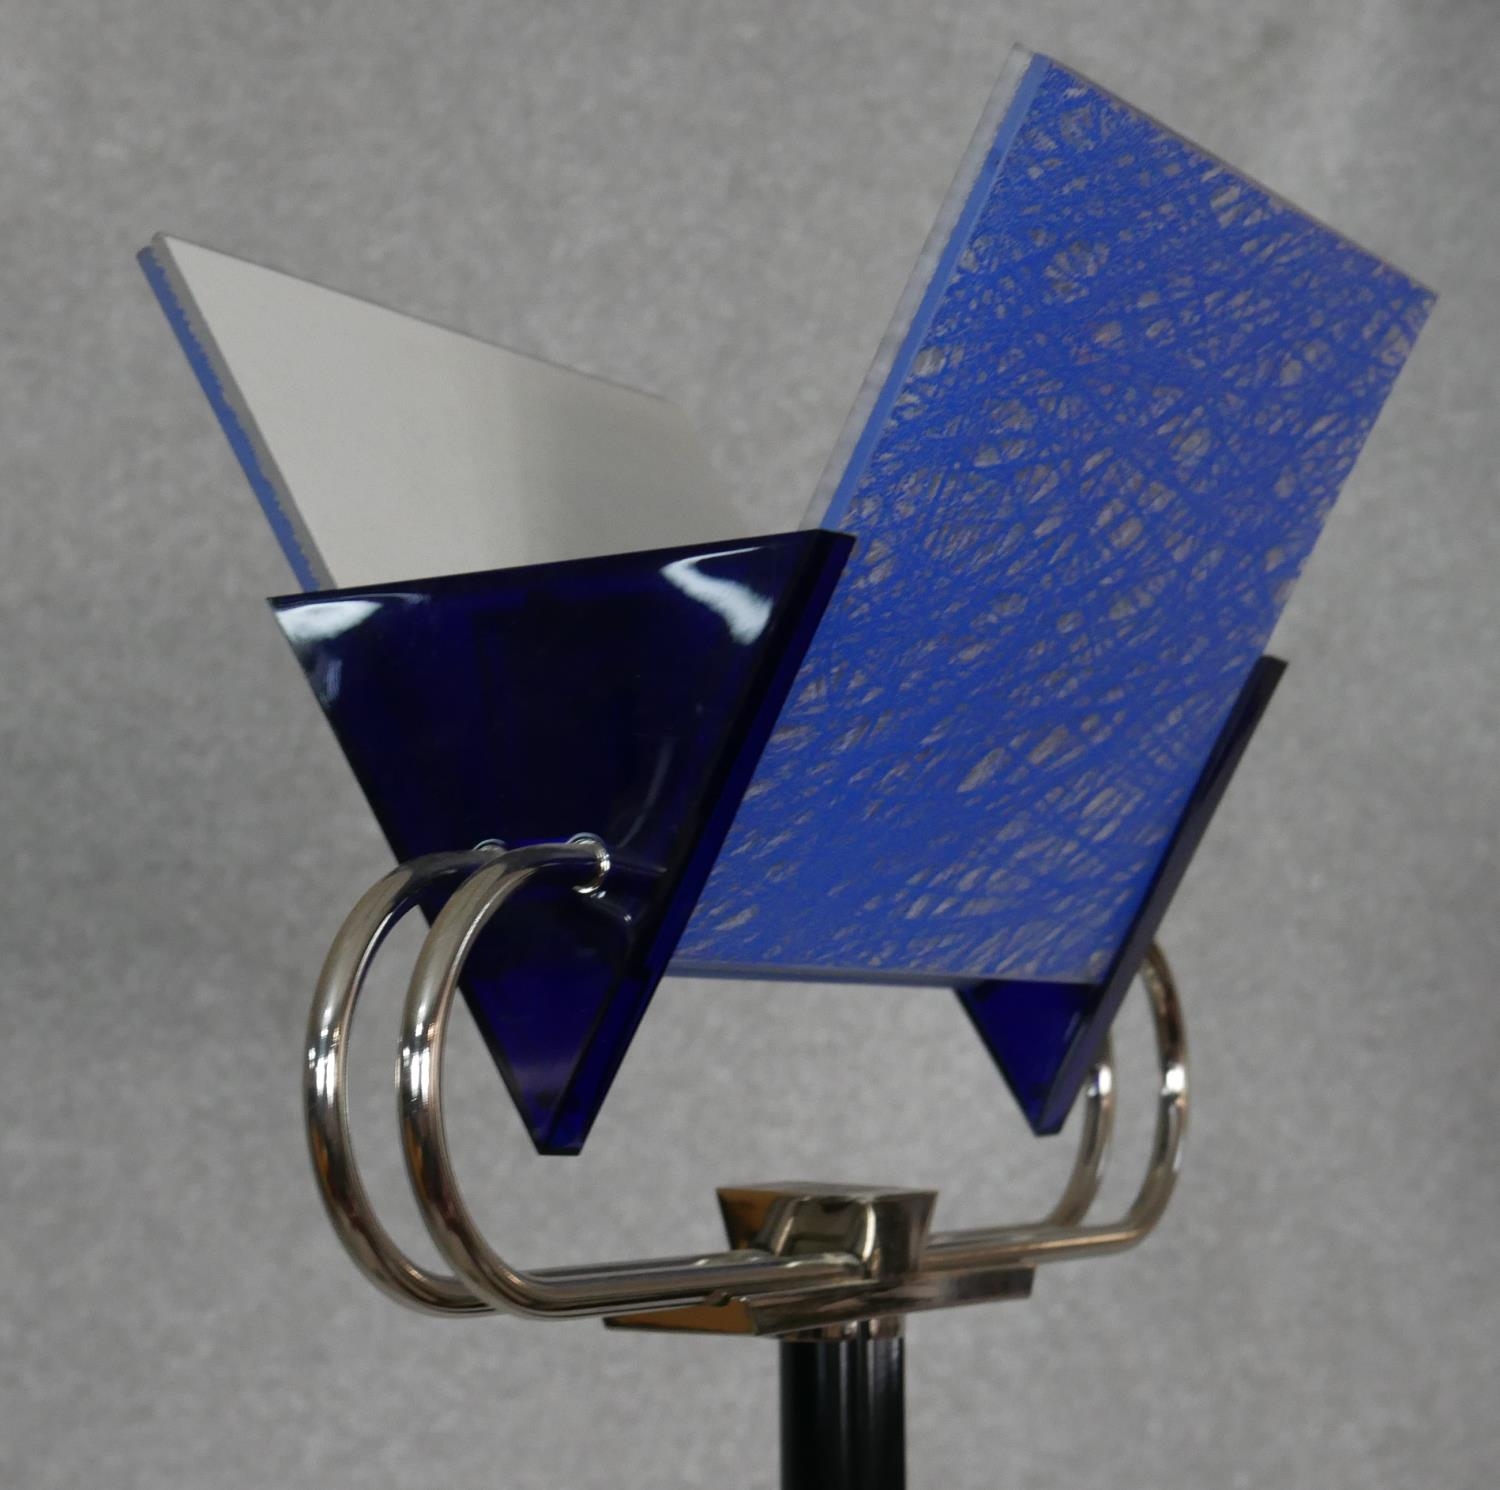 A contemporary Art Deco style standard uplighter with blue acrylic shade panels. H.196cm - Image 2 of 5